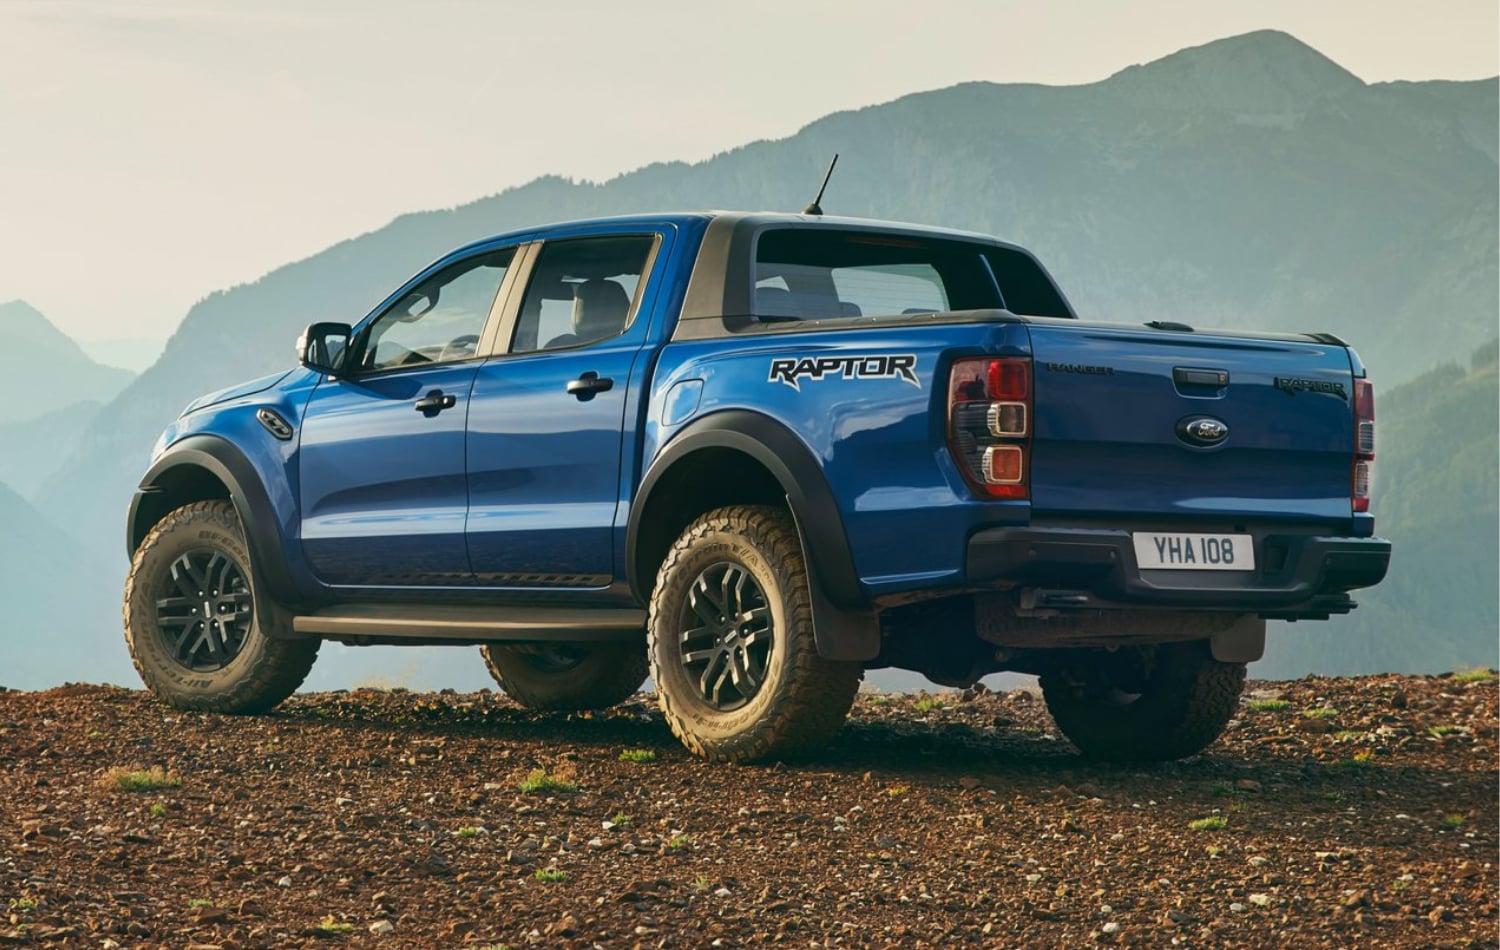 Will we get a chase rack similar to the Ranger Raptor? r